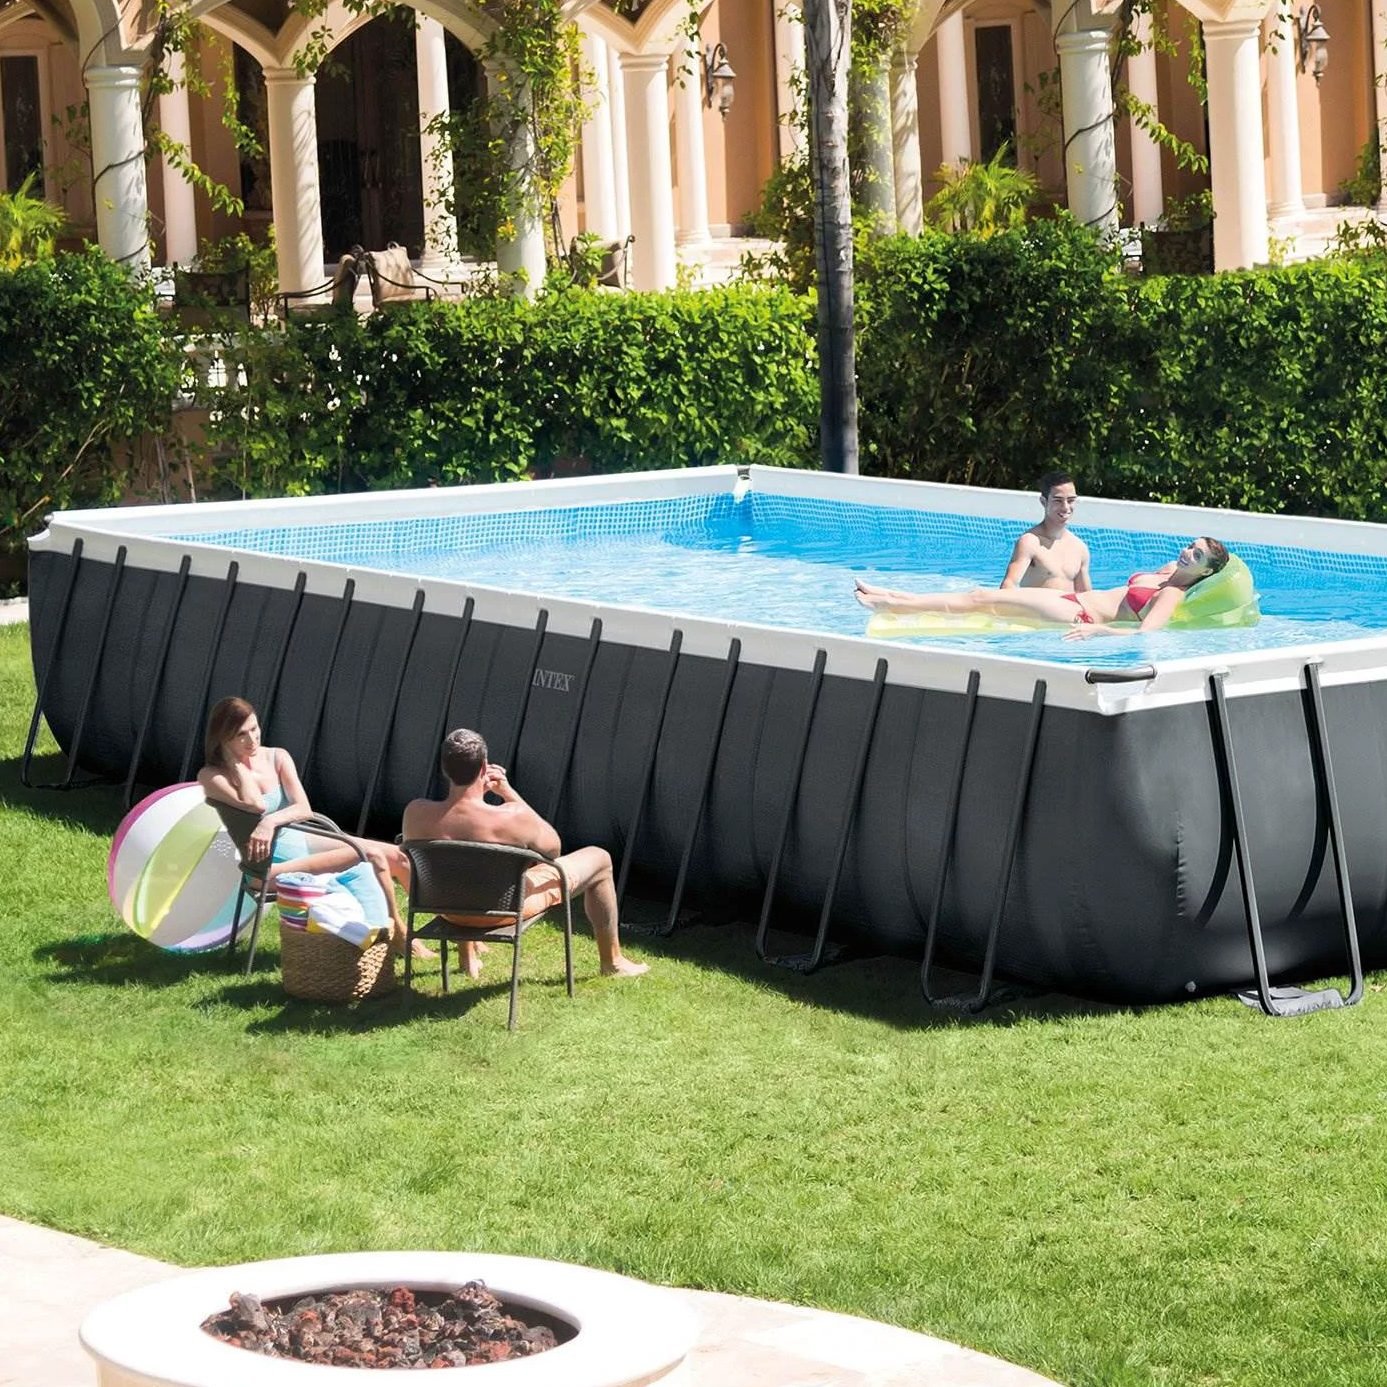 Get Ready for Warm Weather With the Best Above-Ground Pools